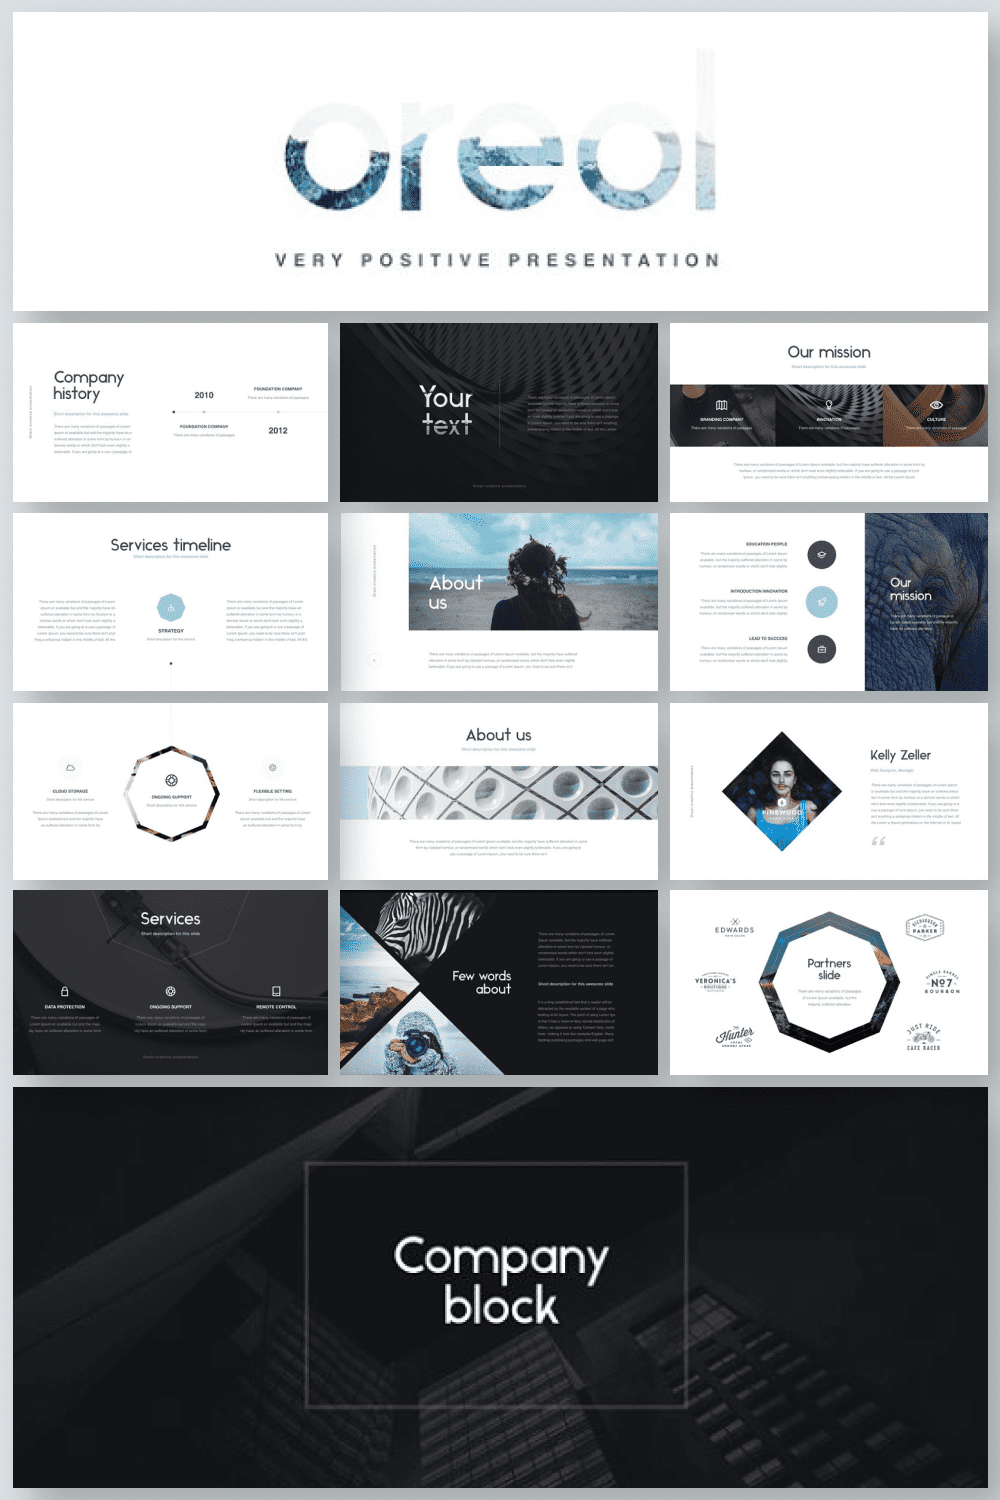 Creative color combinations - black, white and blue. This is a great presentation composition.